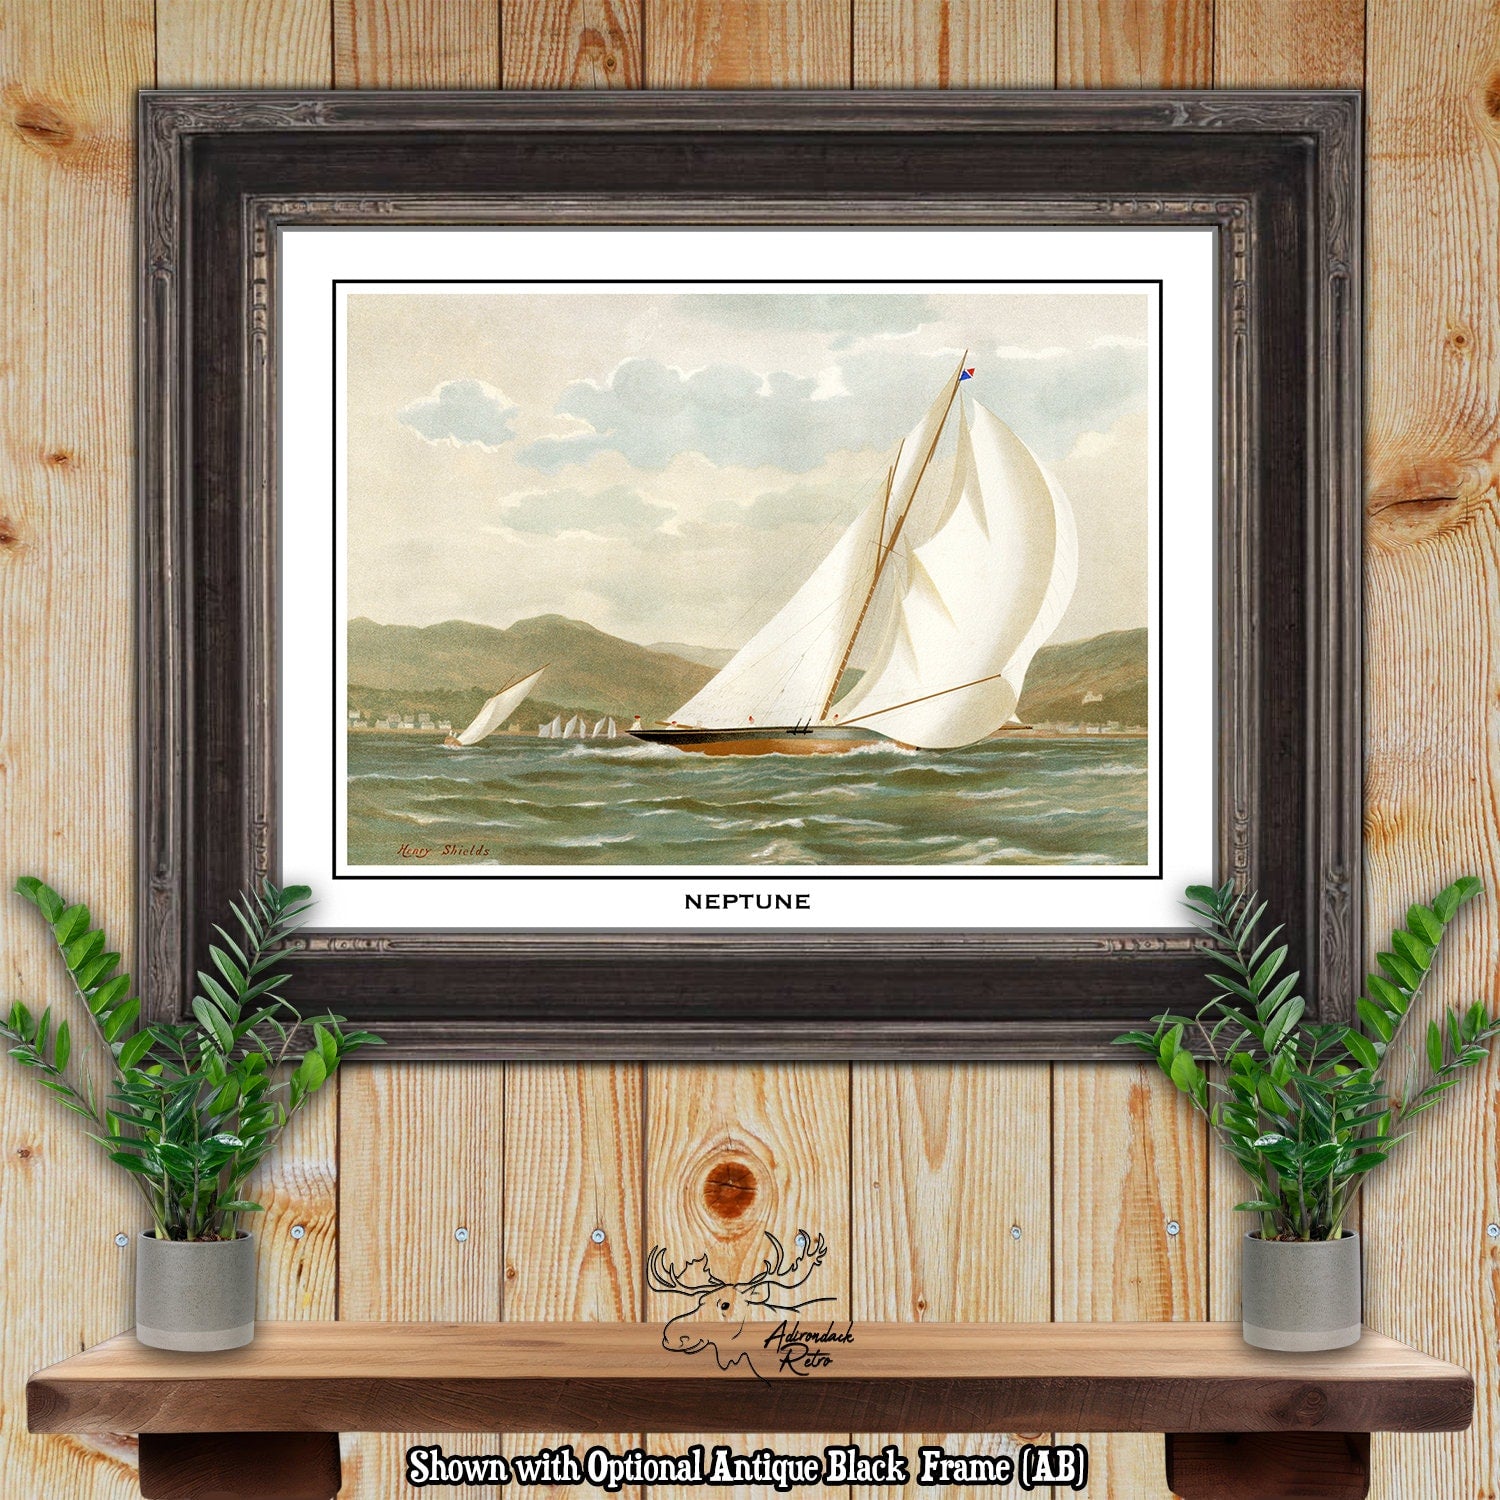 Clyde Yacht Neptune by Henry Shields Giclee Fine Art Print at Adirondack Retro